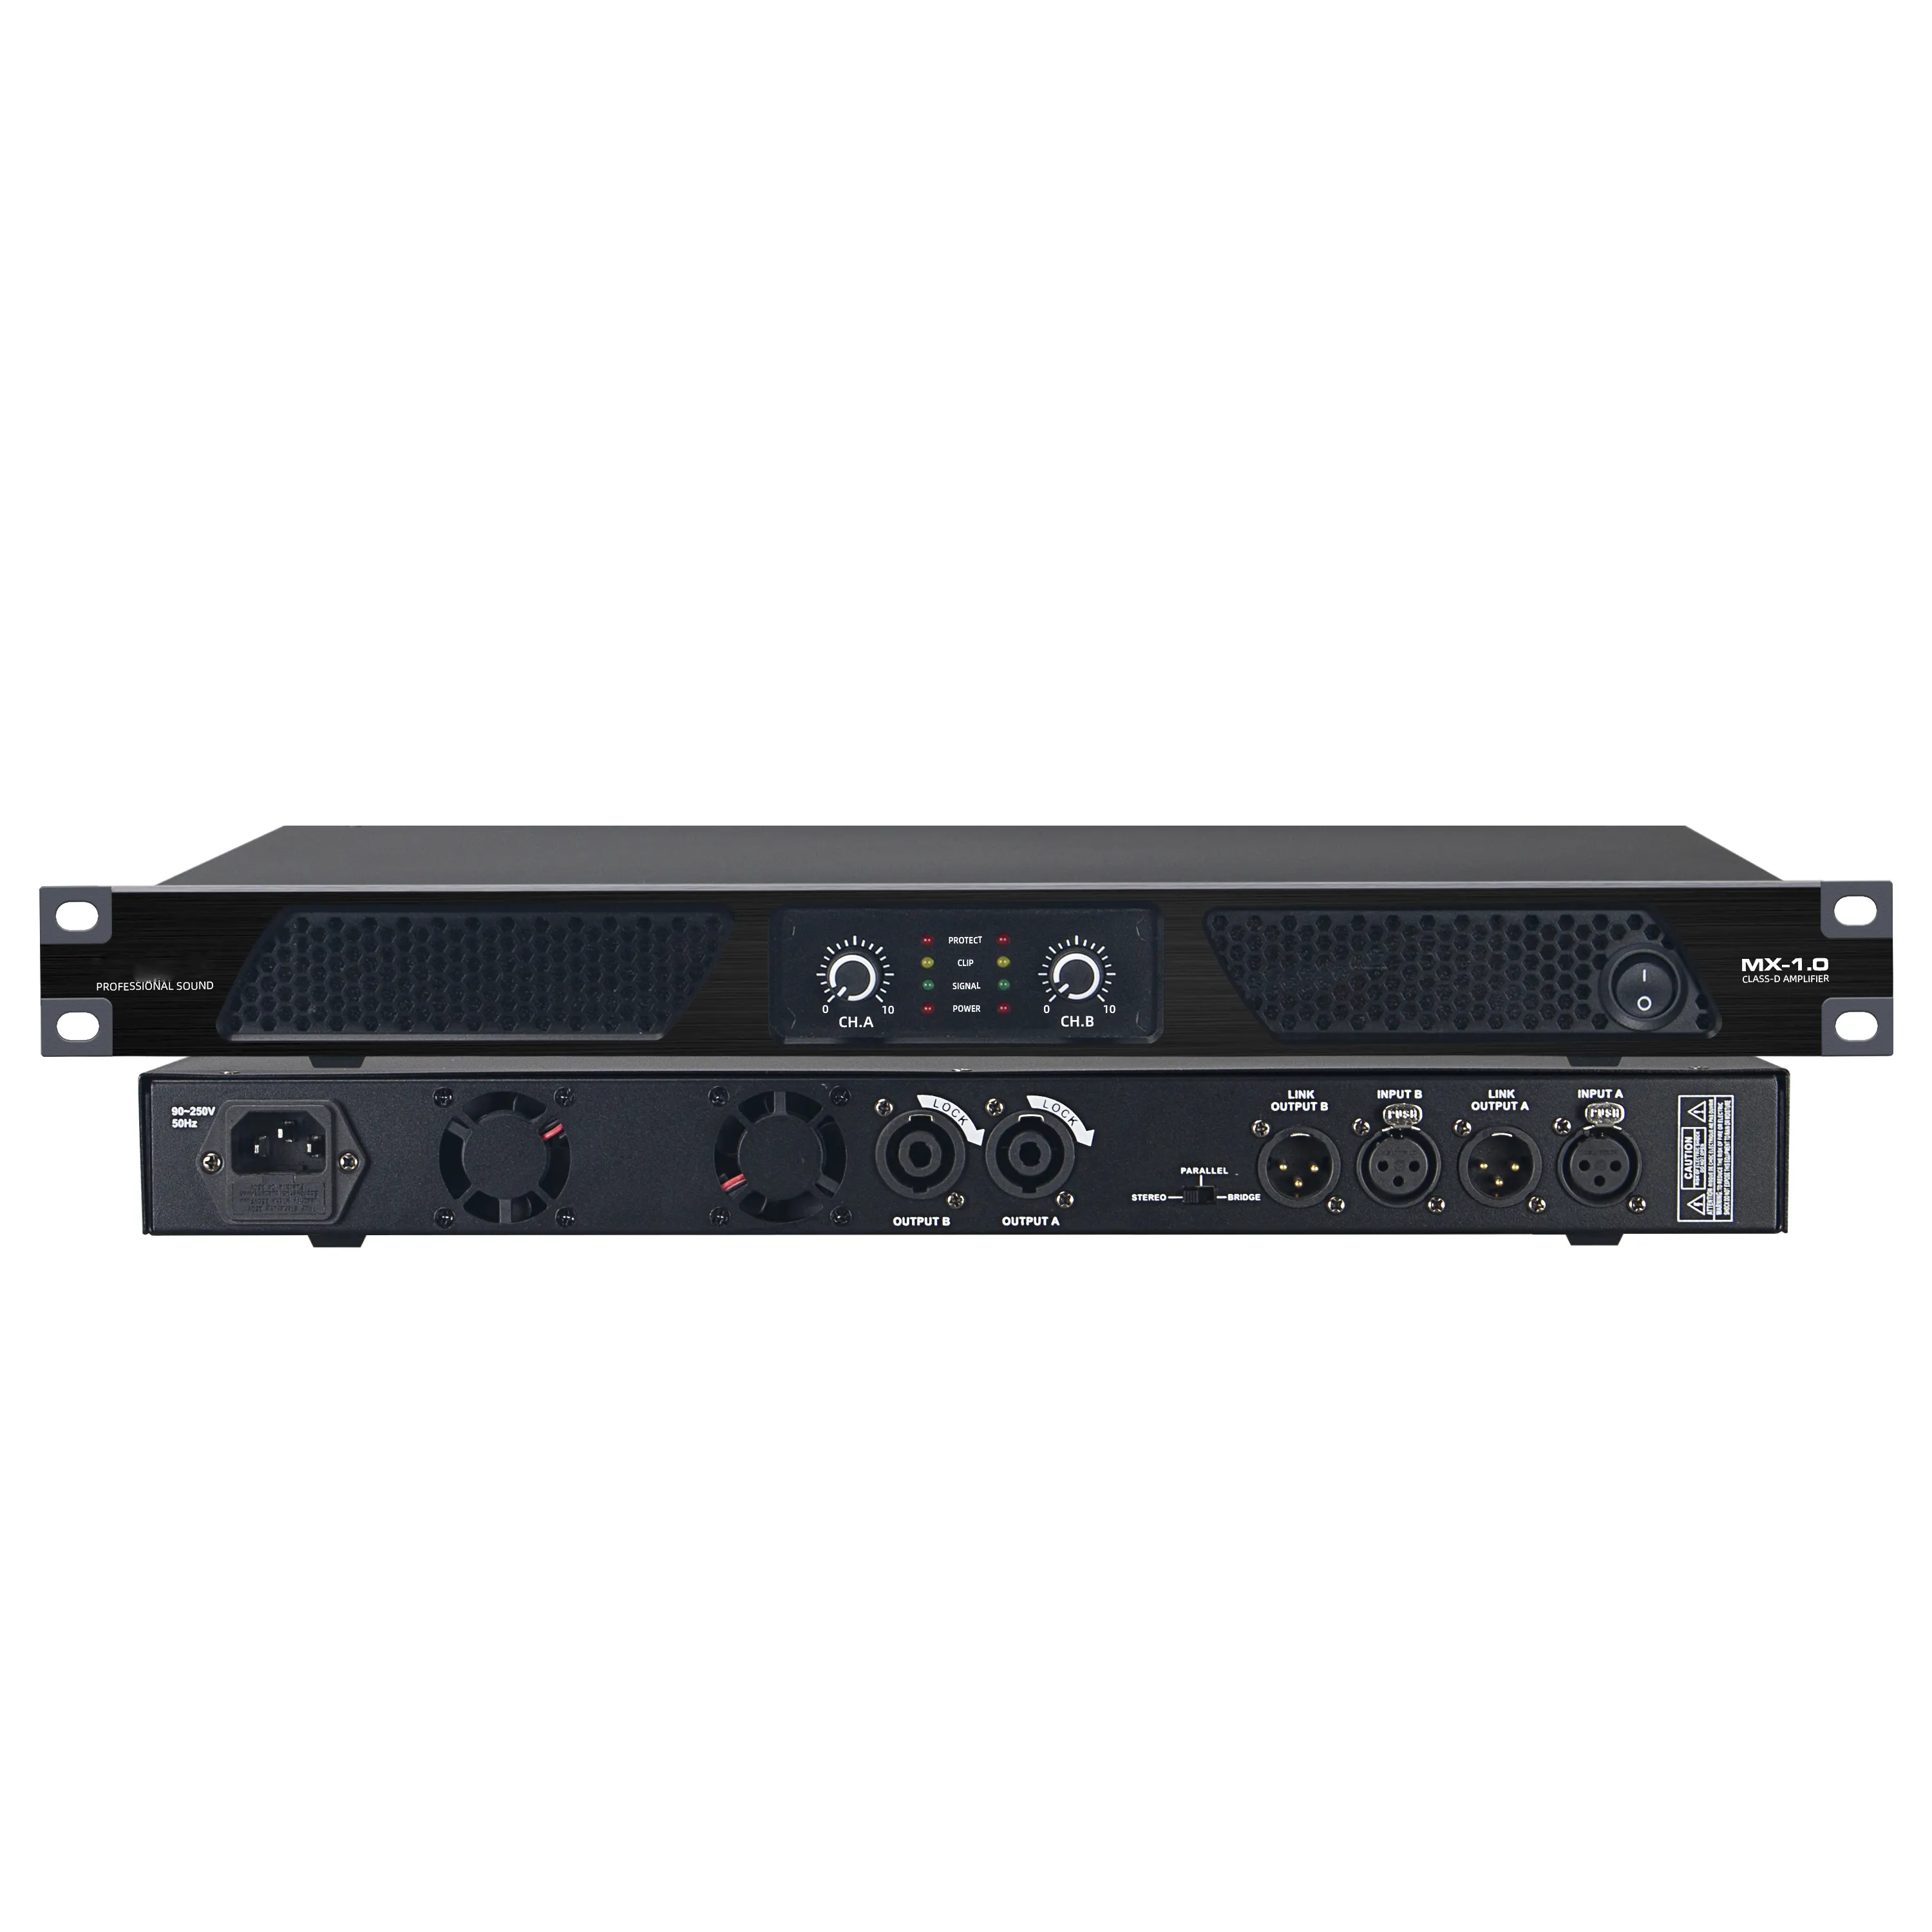 1U 500W 2 Channel Professional Digital Power Amplifier for Stage Performance Concert Meeting KTV